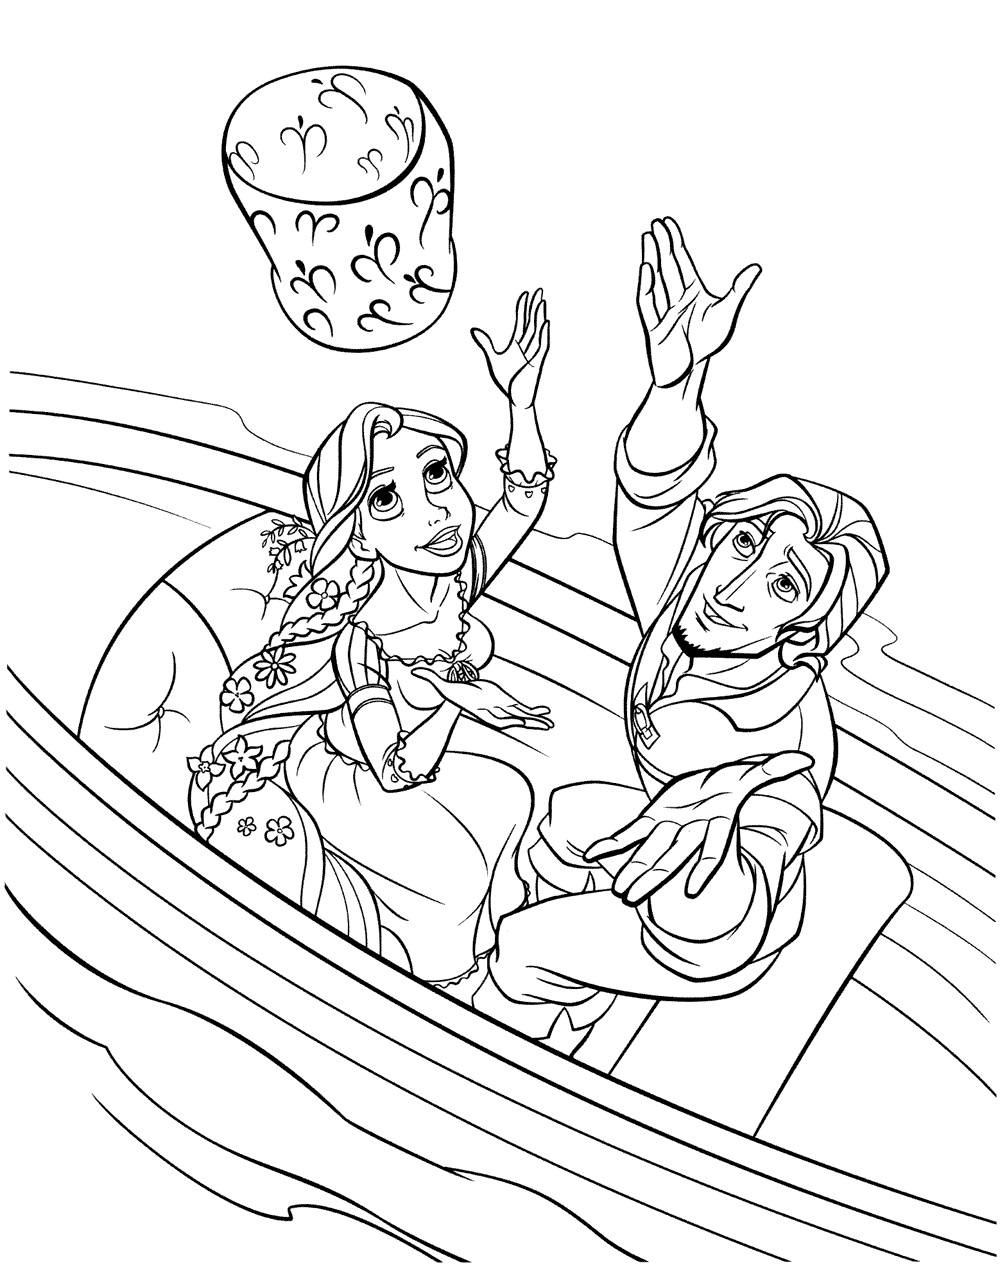 tangled coloring pages lanterns in the sky - photo #44